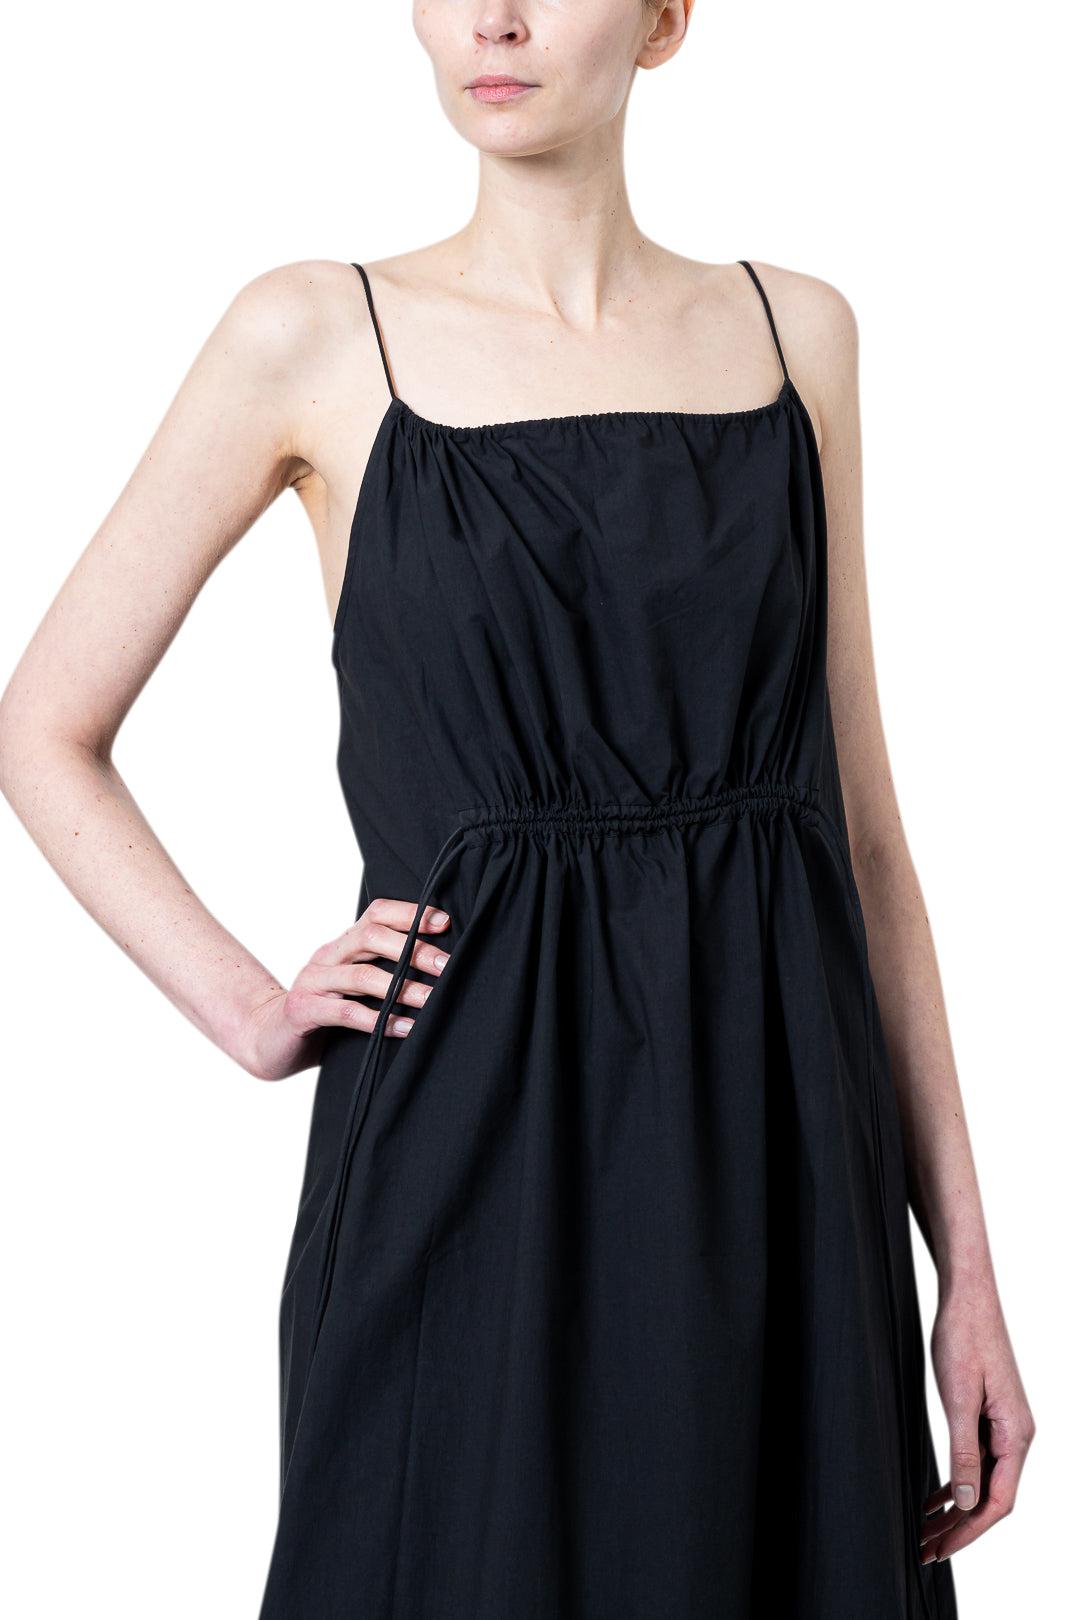 St. Agni-Relaxed Drawstring Dress-R24-904BLK-dgallerystore